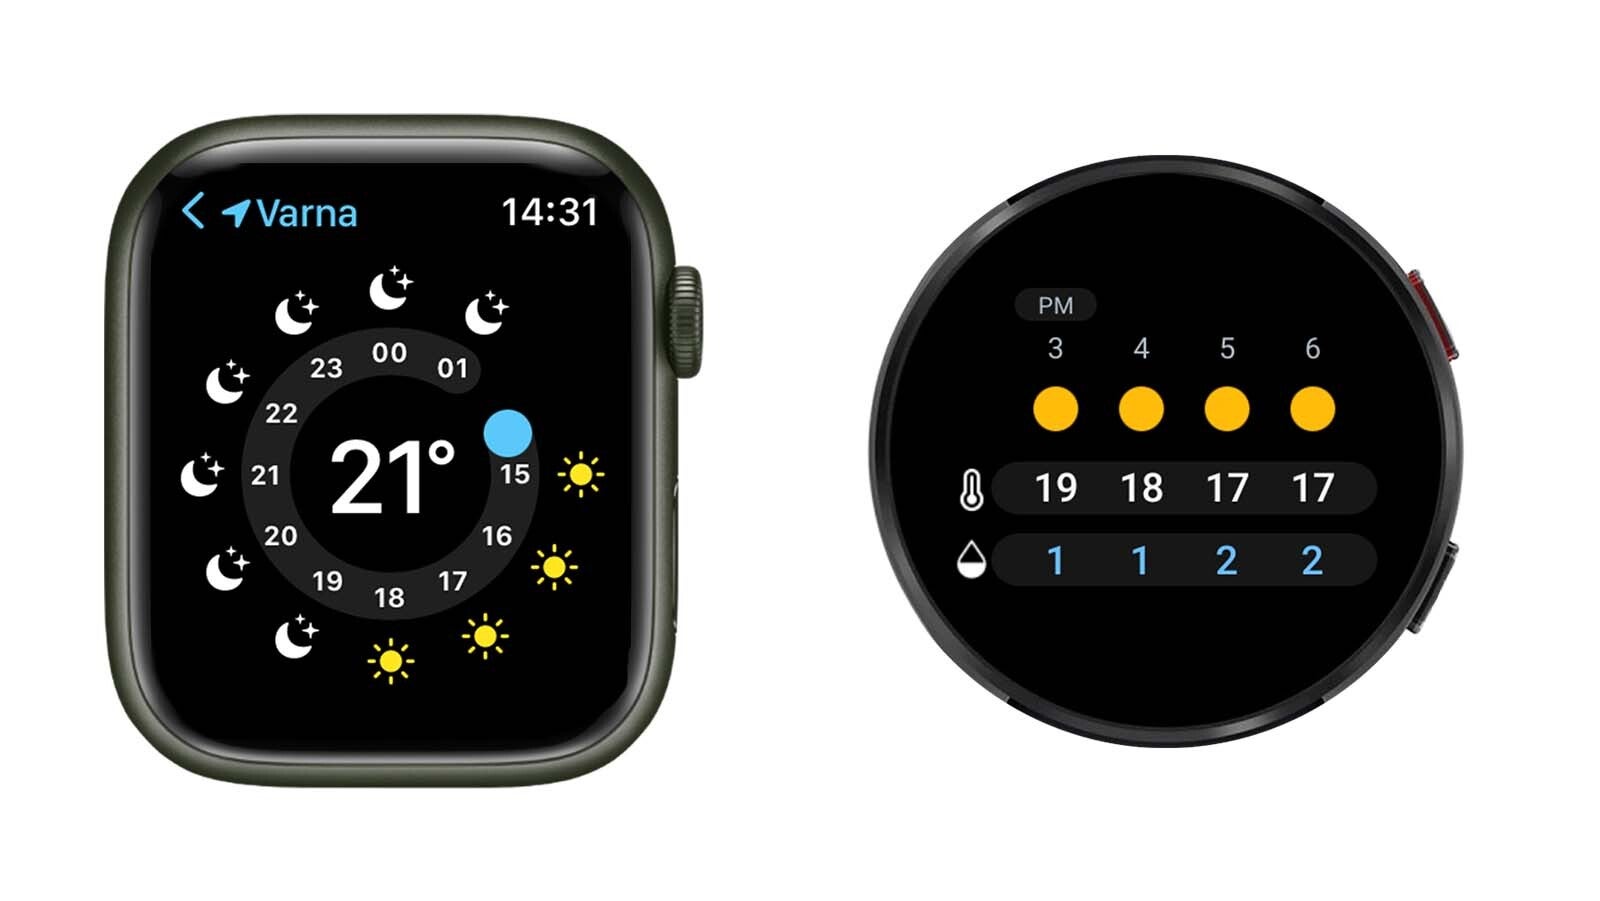 Apple Watch vs Samsung Galaxy Watch&amp;nbsp; interface comparison - Are round smartwatches terribly impractical? Why the rectangular Apple Watch makes way more sense